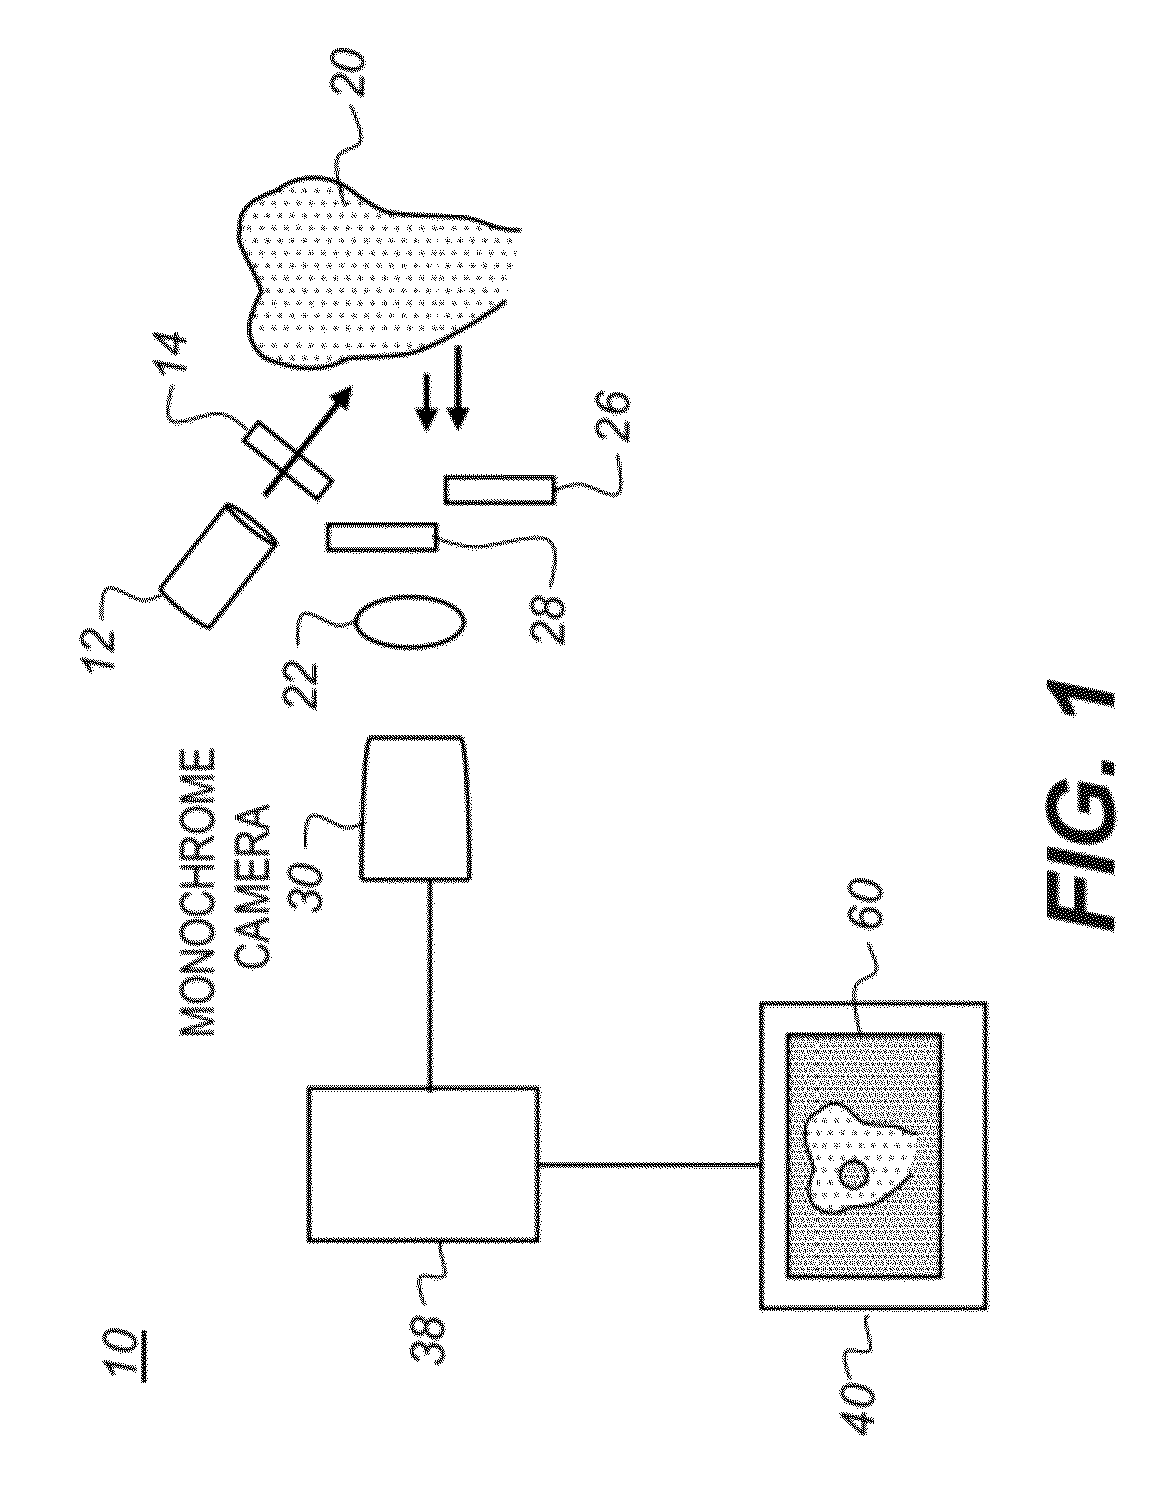 Apparatus and method for caries detection